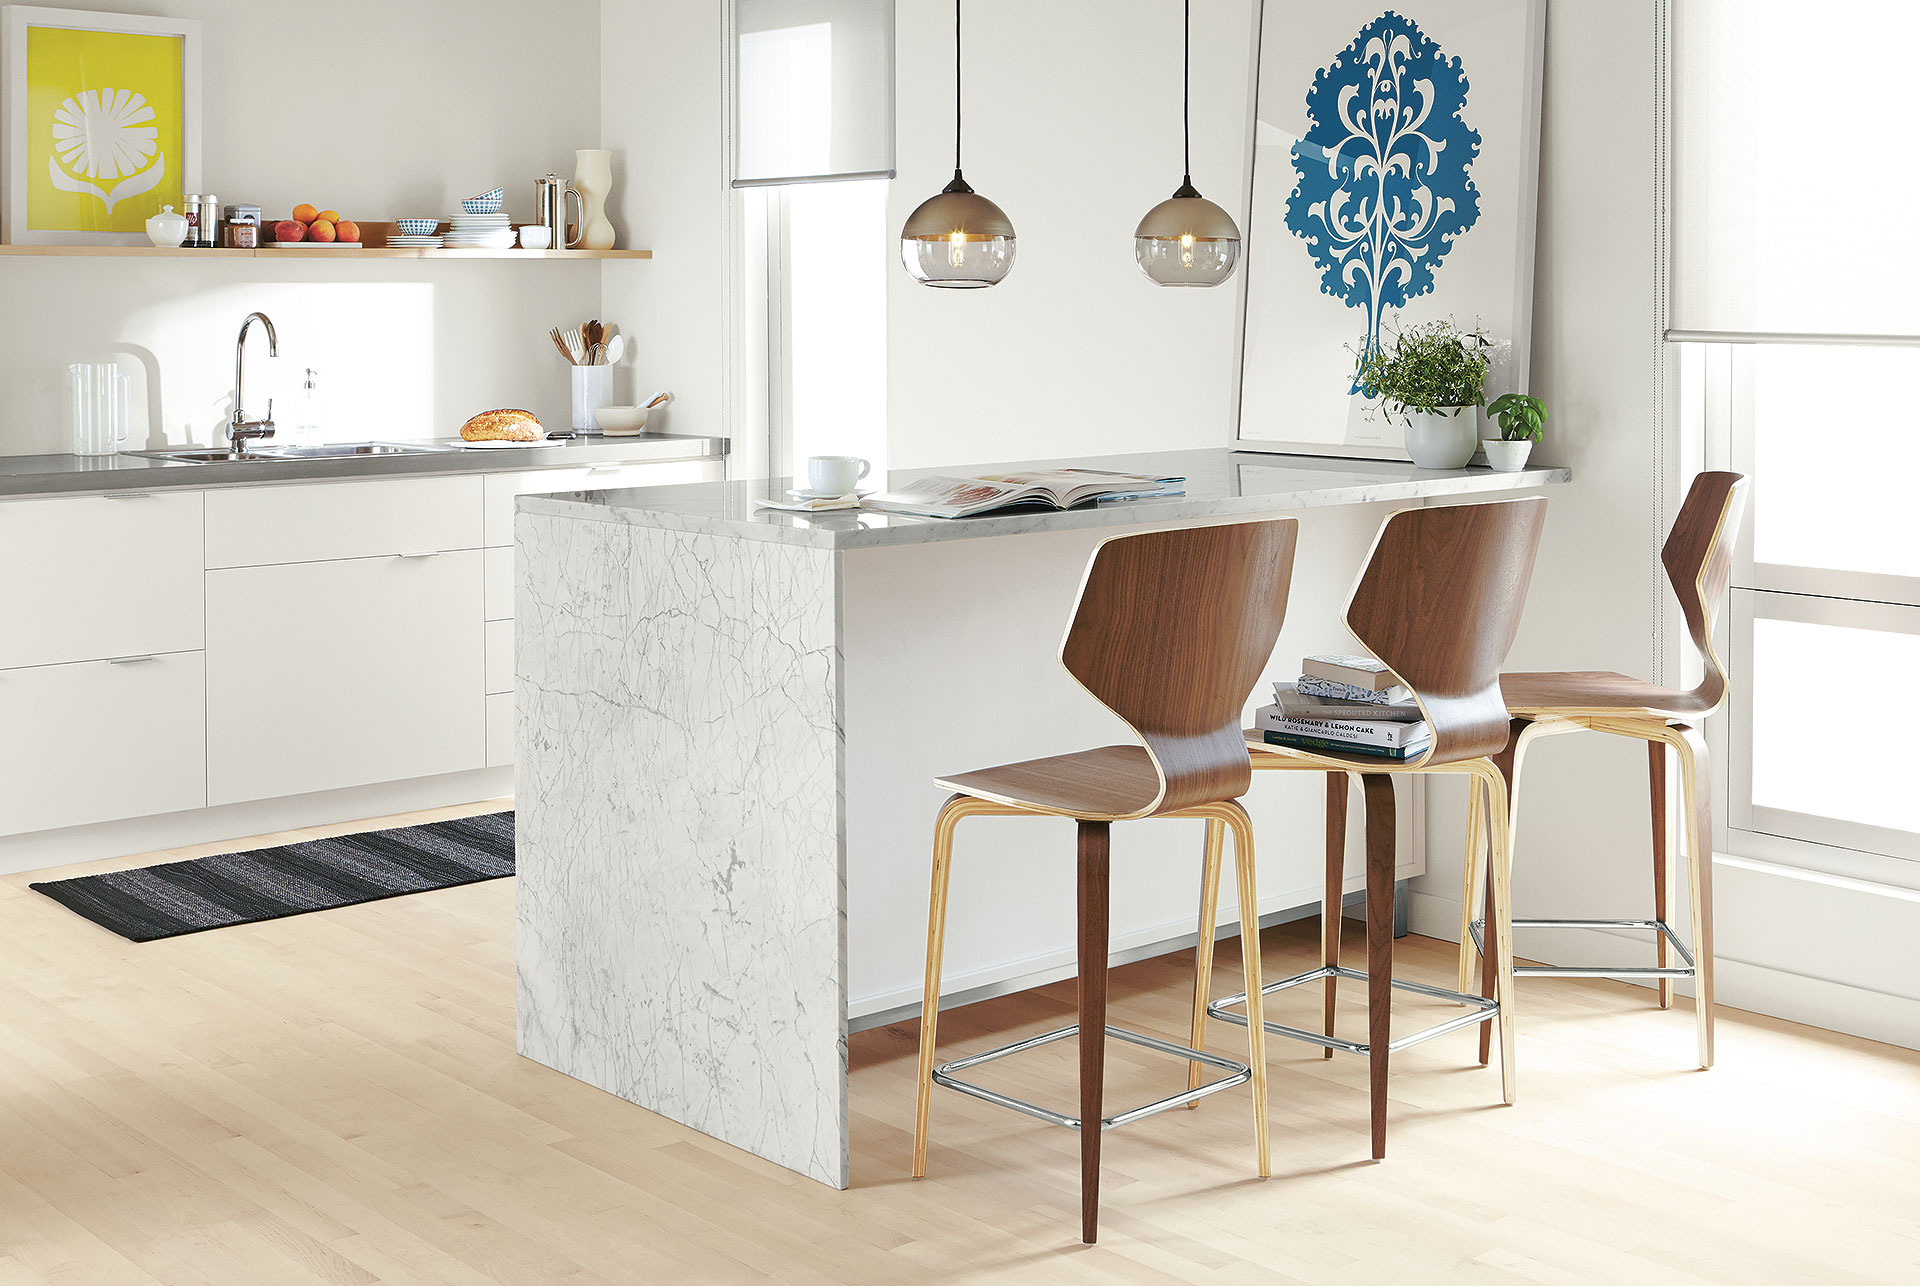 How To Choose Counter Bar Stools, Counter Height Bar Stools For Kitchen Island